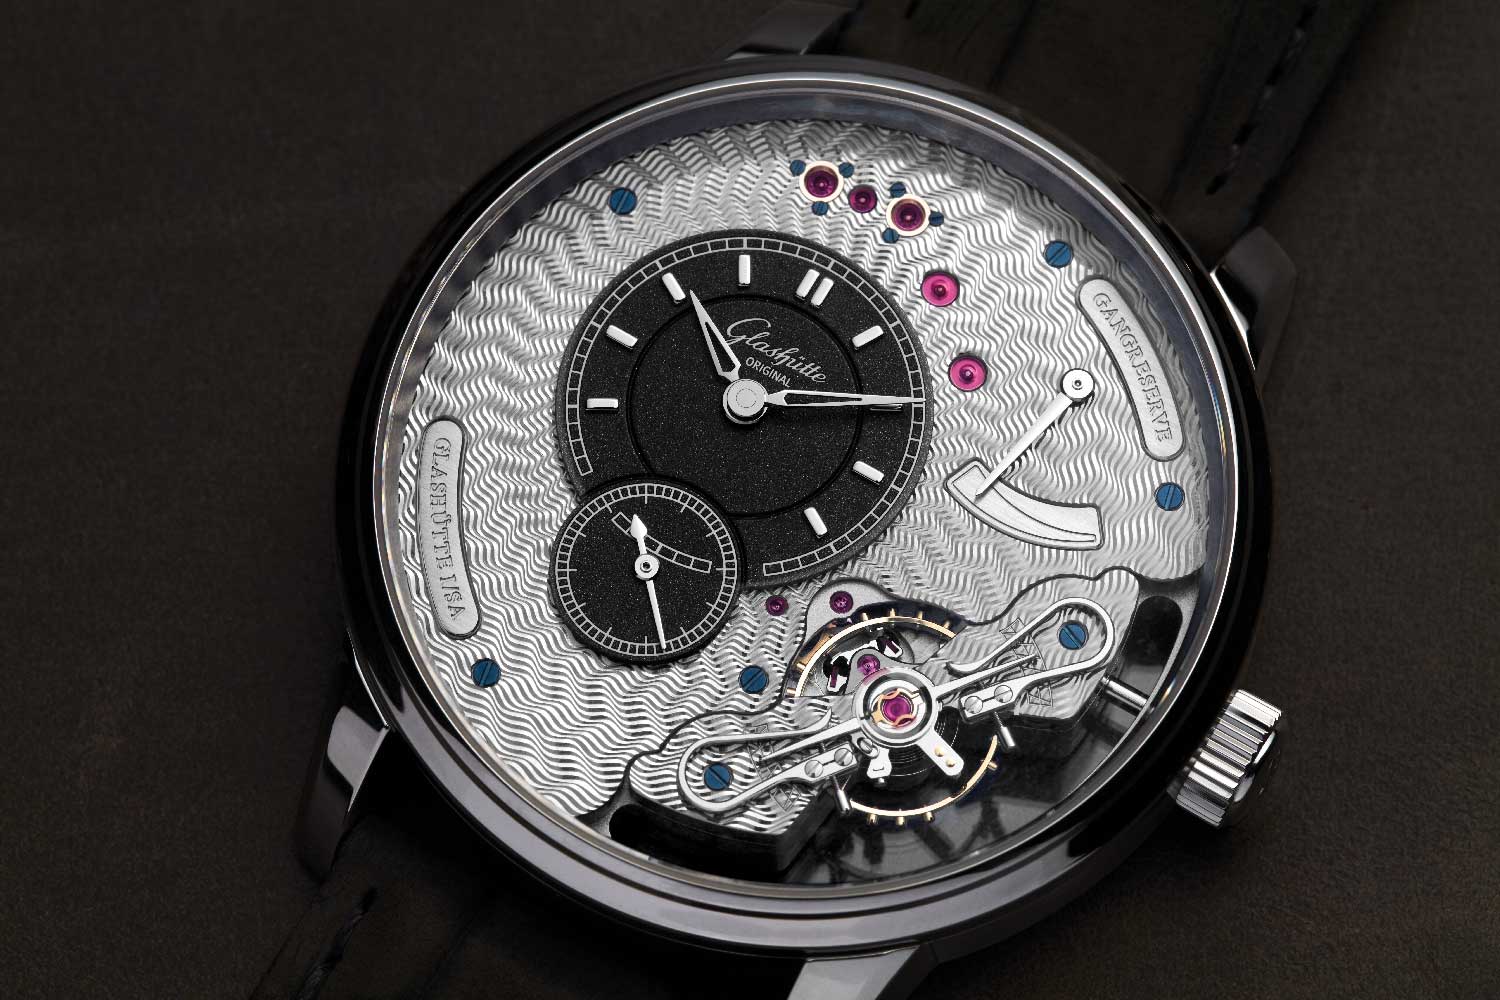 PanoInverse Platinum Limited Edition featuring Glashütte Original’s signature three-quarter plate with guilloché engraving and a partially skeletonized baseplate inspired by the design of the glass dome that sits atop of Dresden Academy of Fine Arts